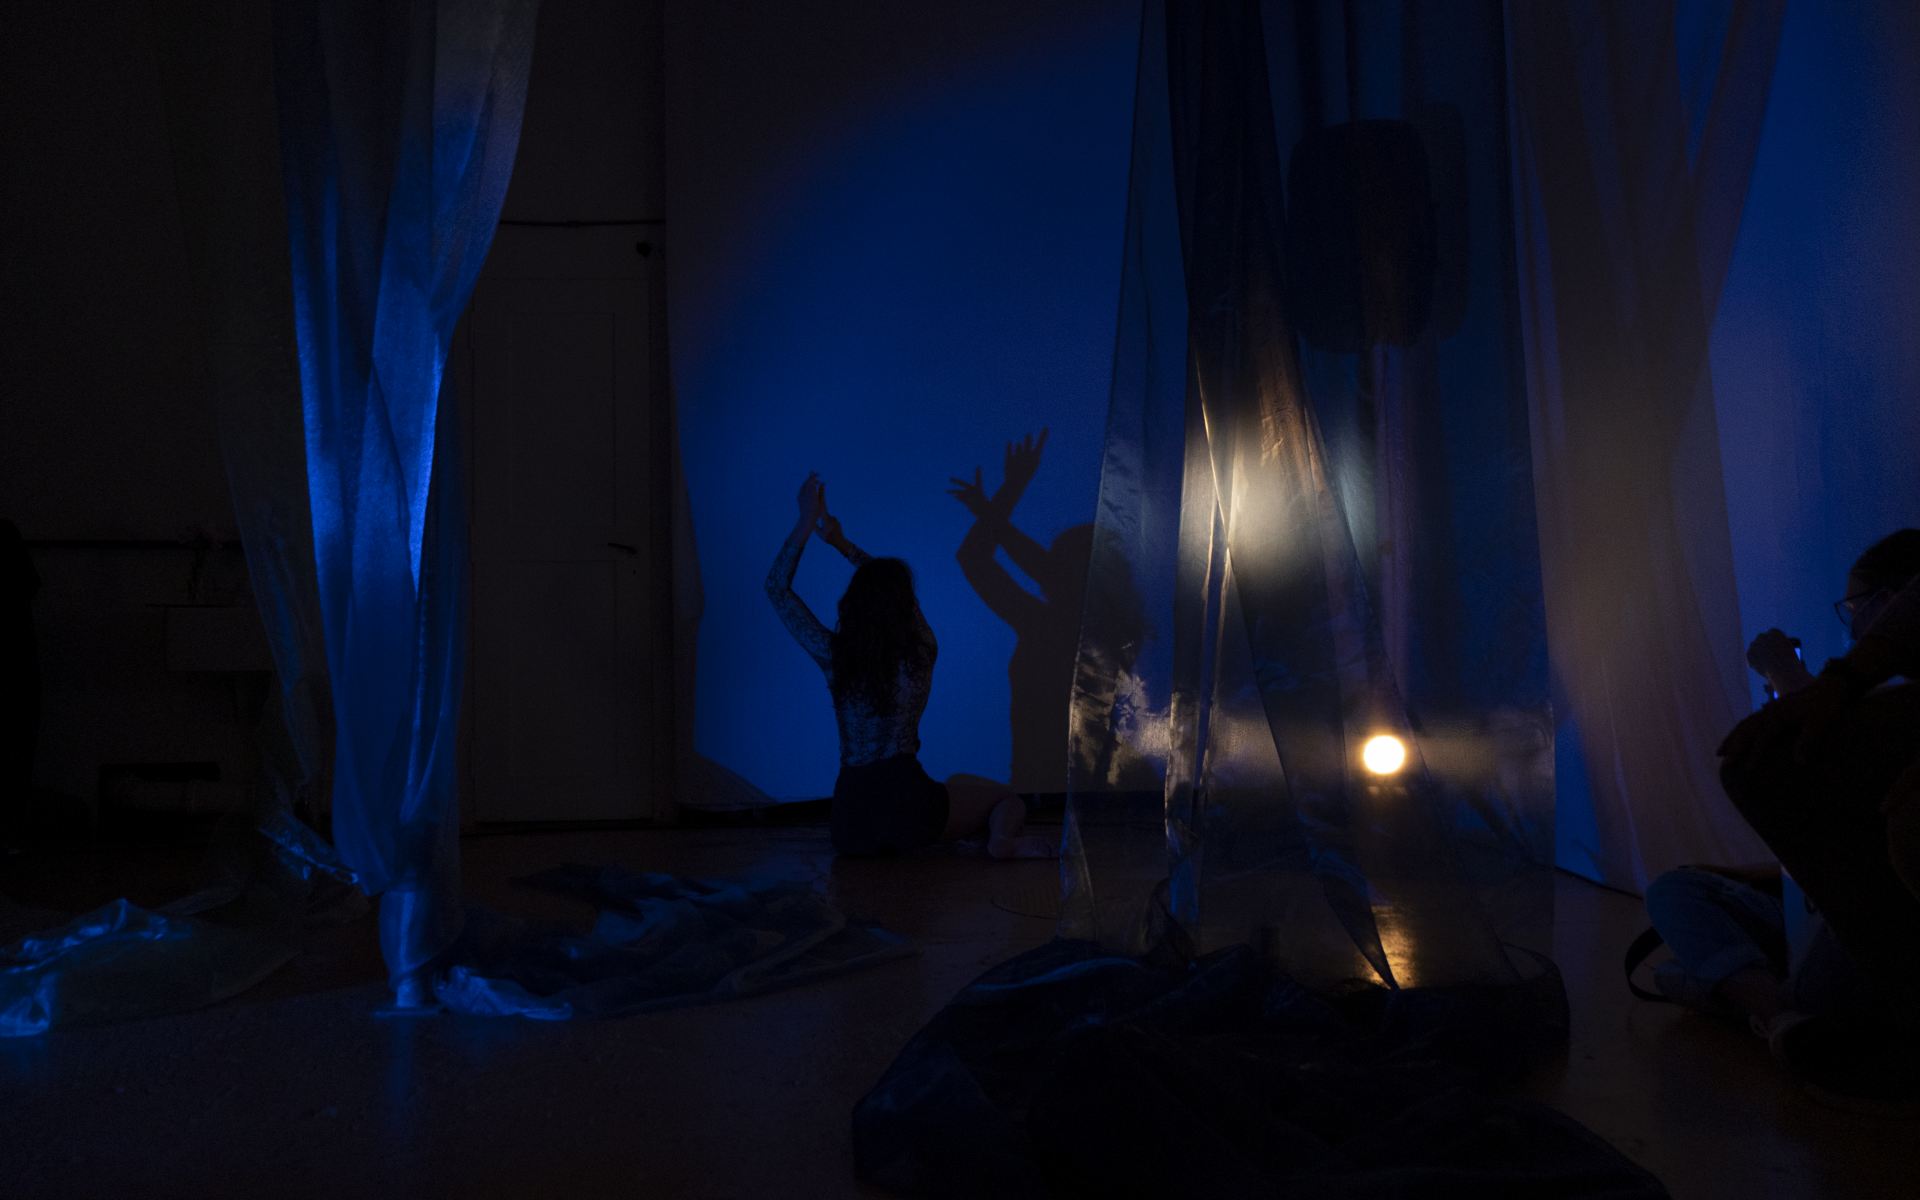 An image of a figure in a costume in a dark room.